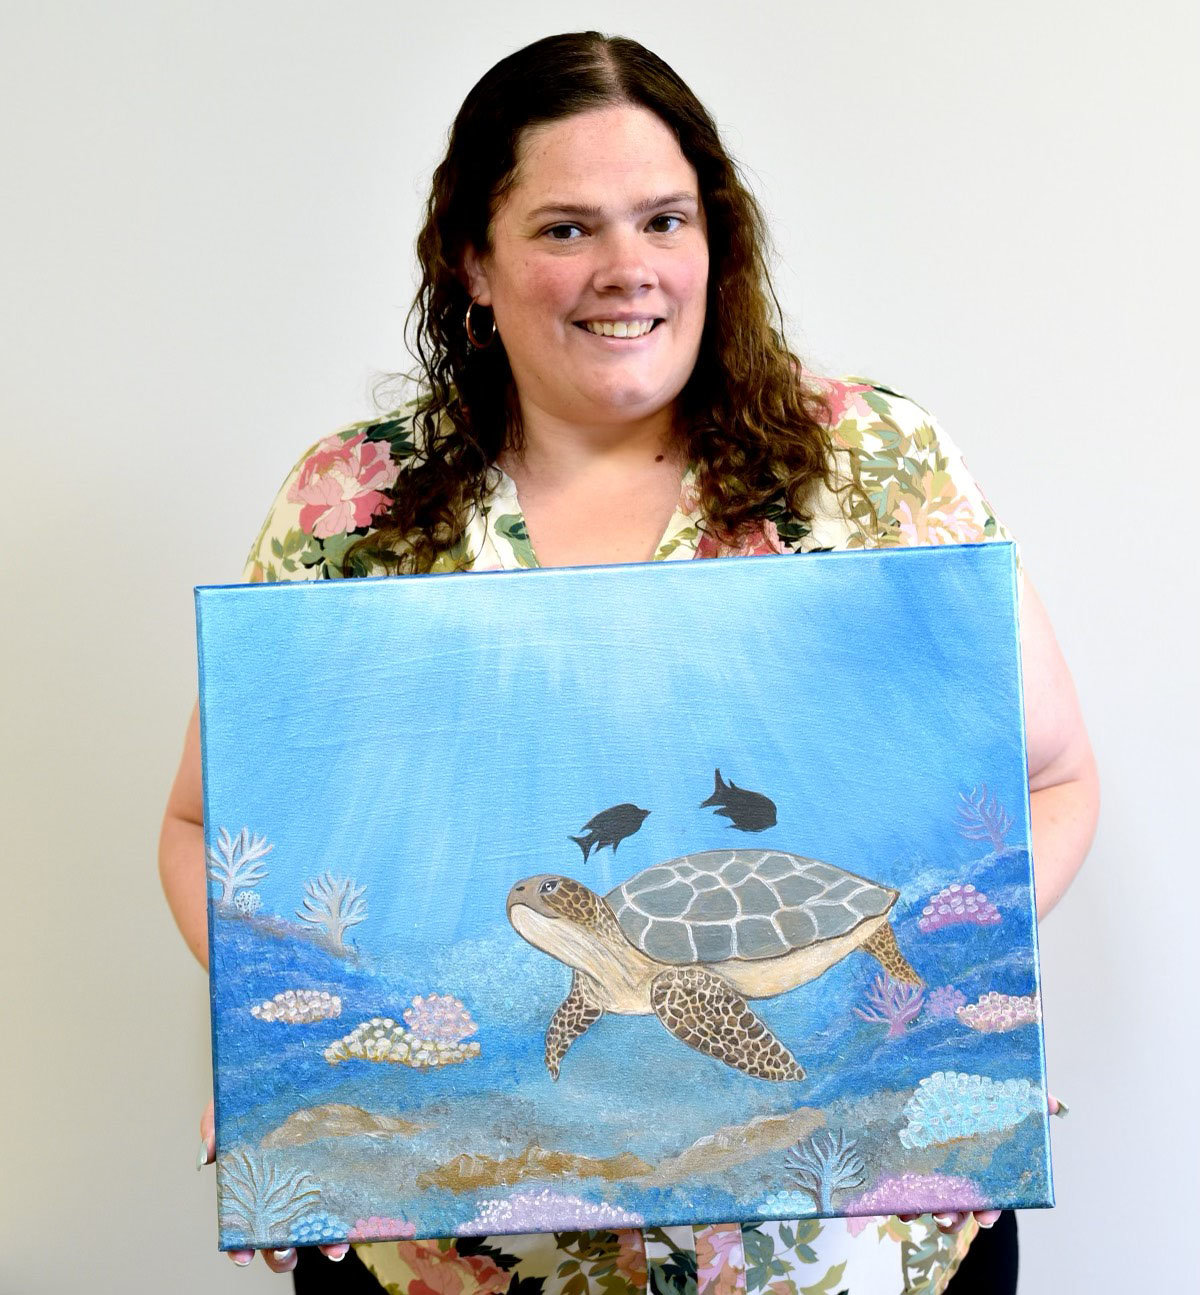 Sarah Torres holds an original sea turtle painting available for bid.